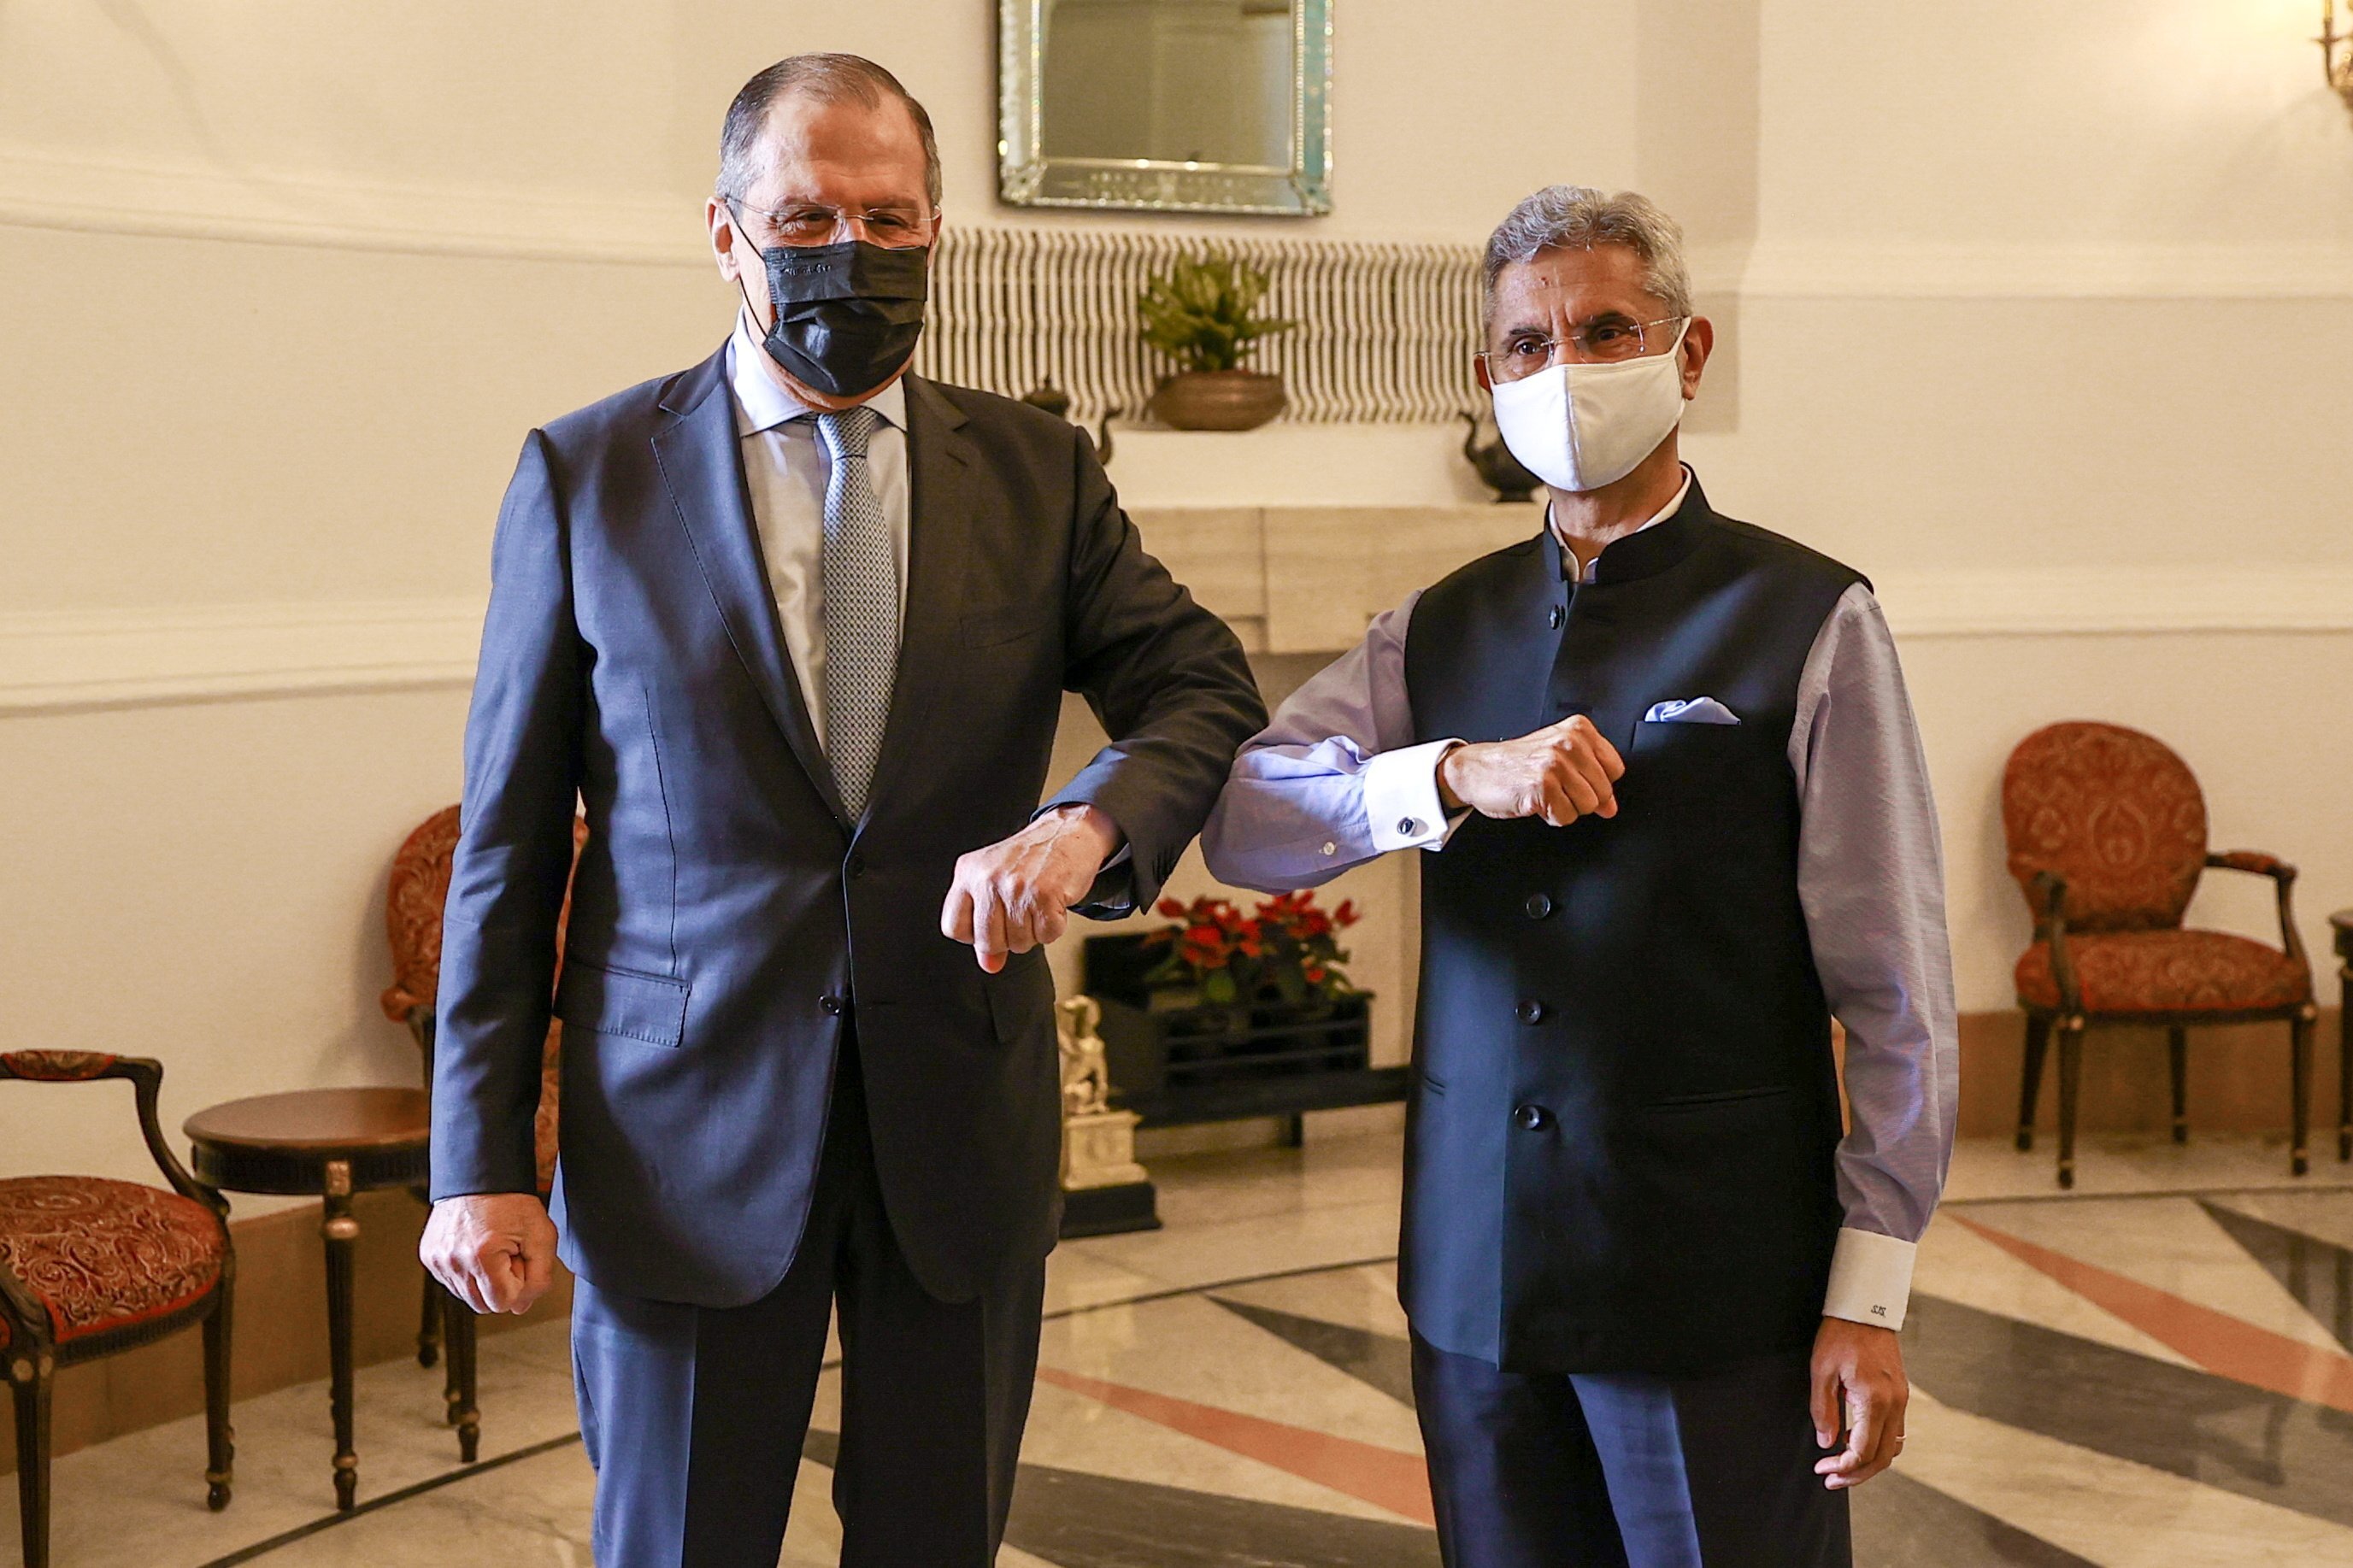 Russian Foreign Minister Sergey Lavrov with his counterpart S. Jaishankar. Photo: Reuters